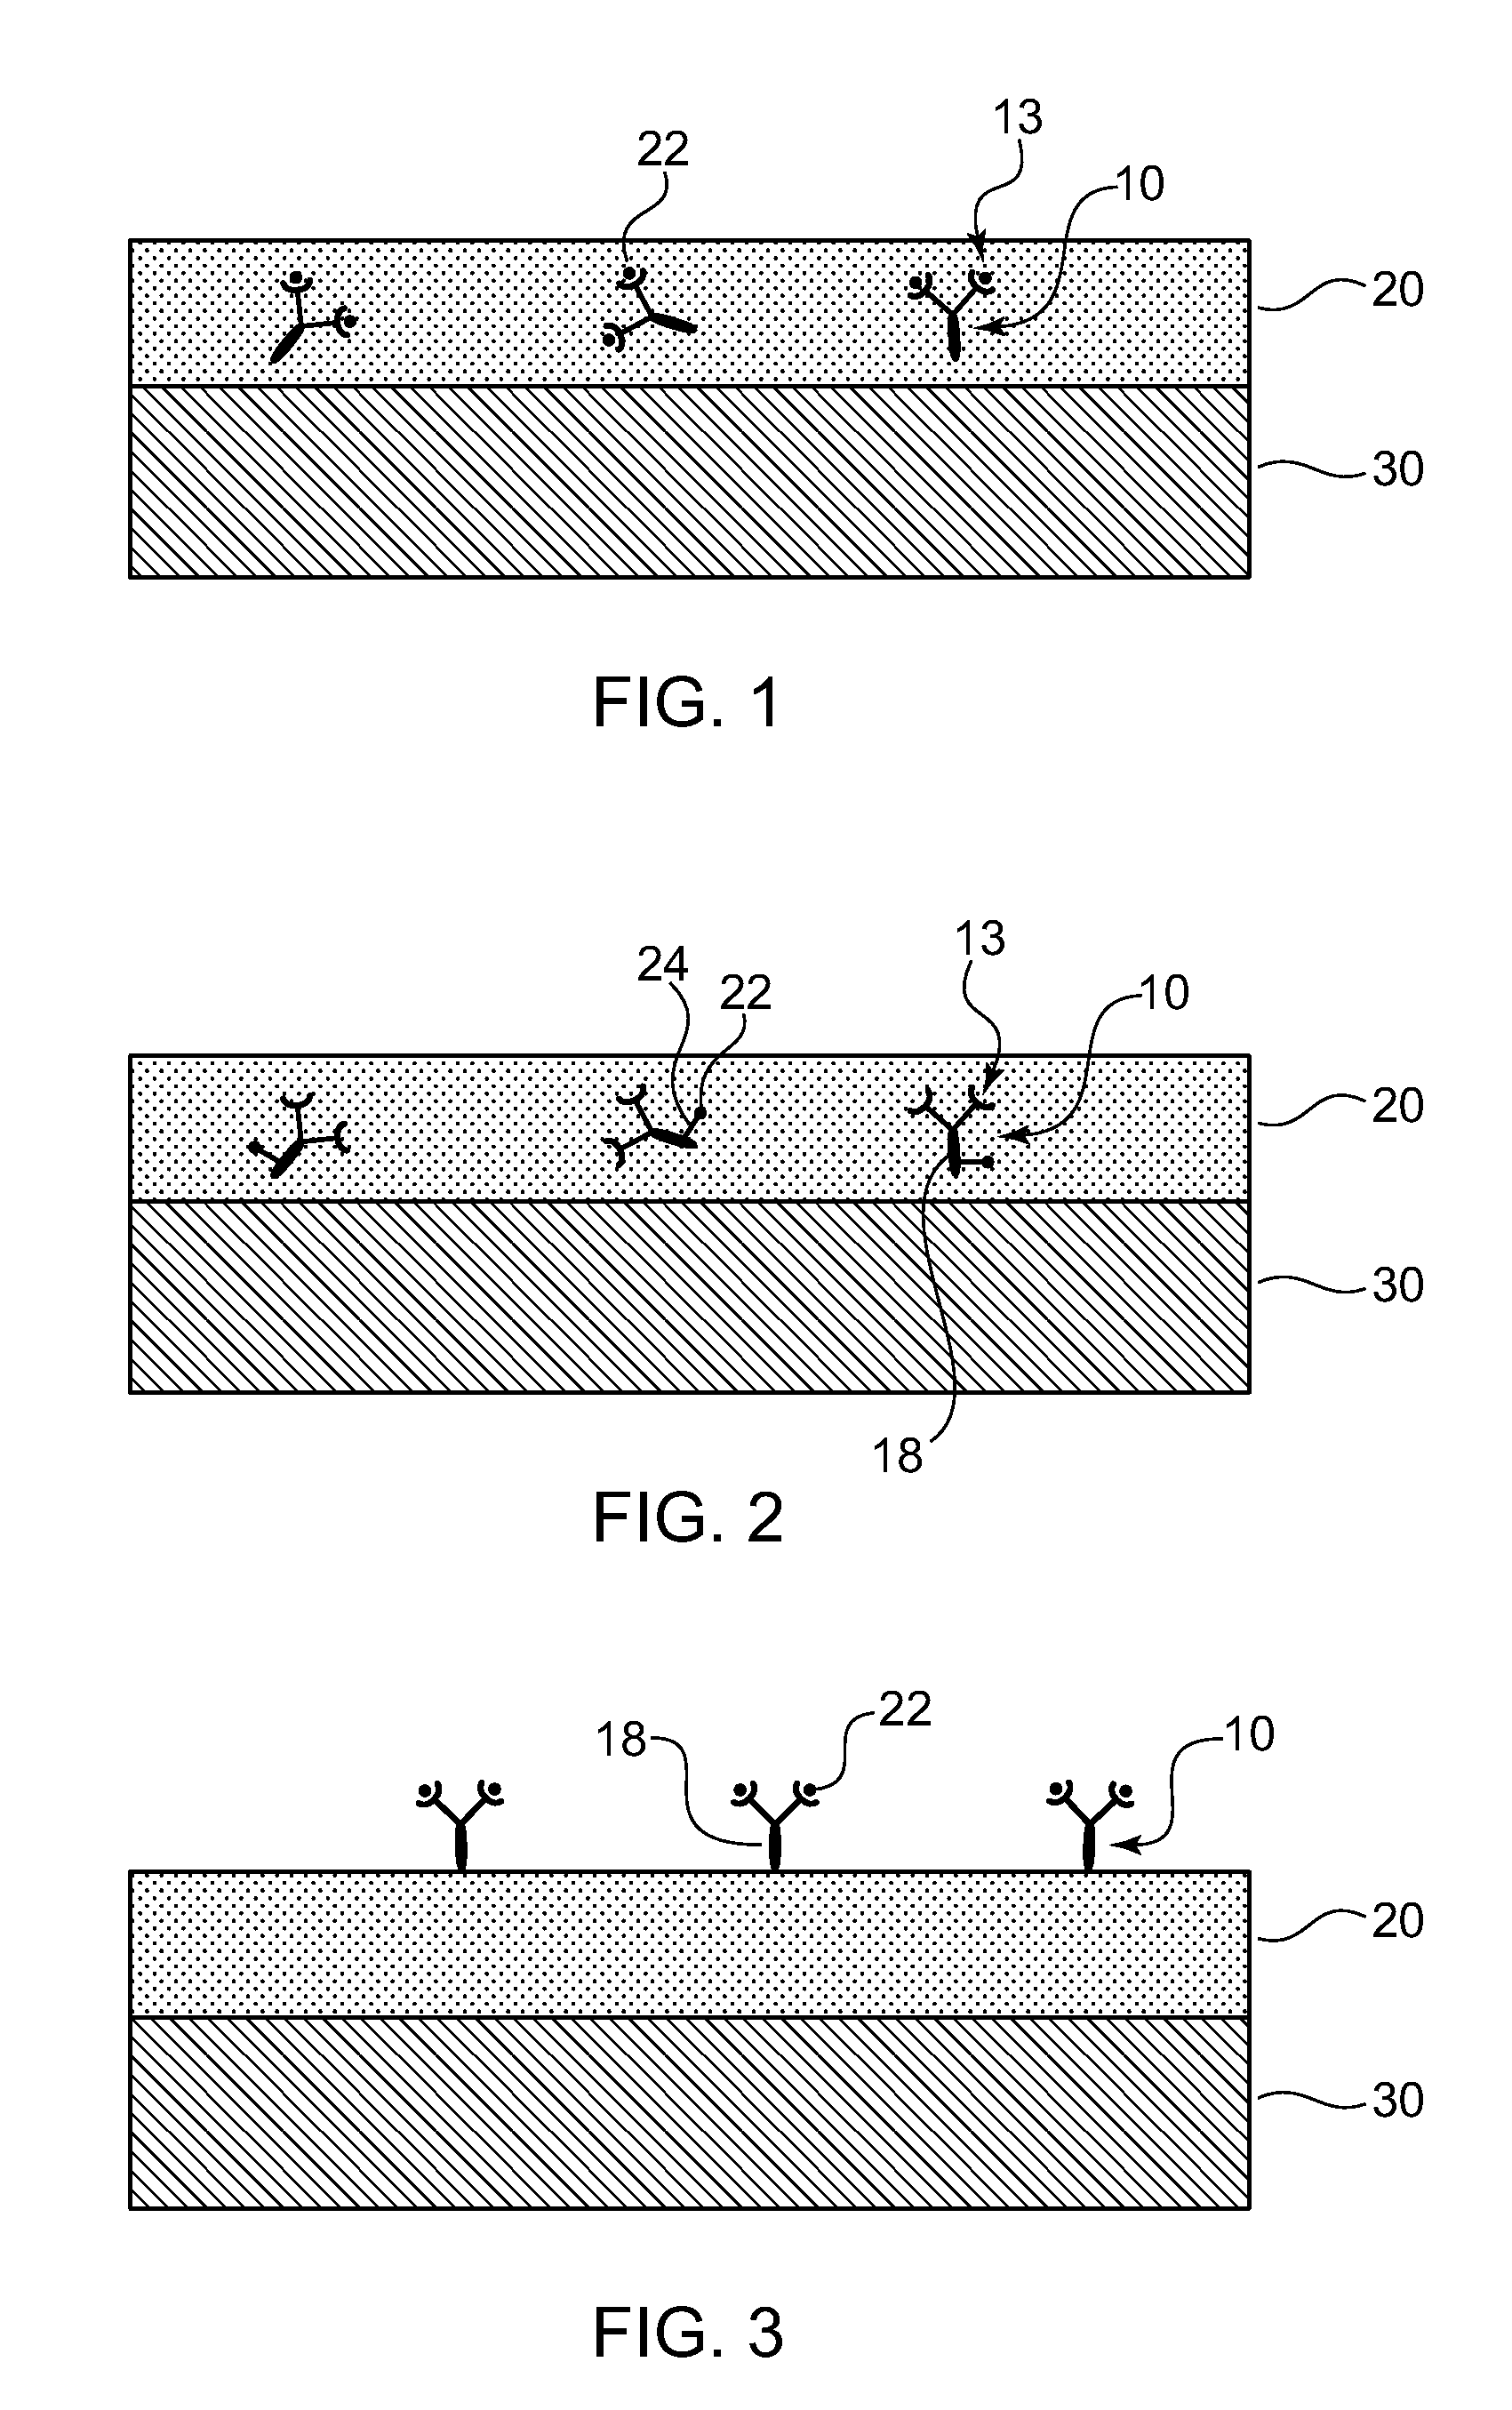 Medical devices coated with drug carrier macromolecules